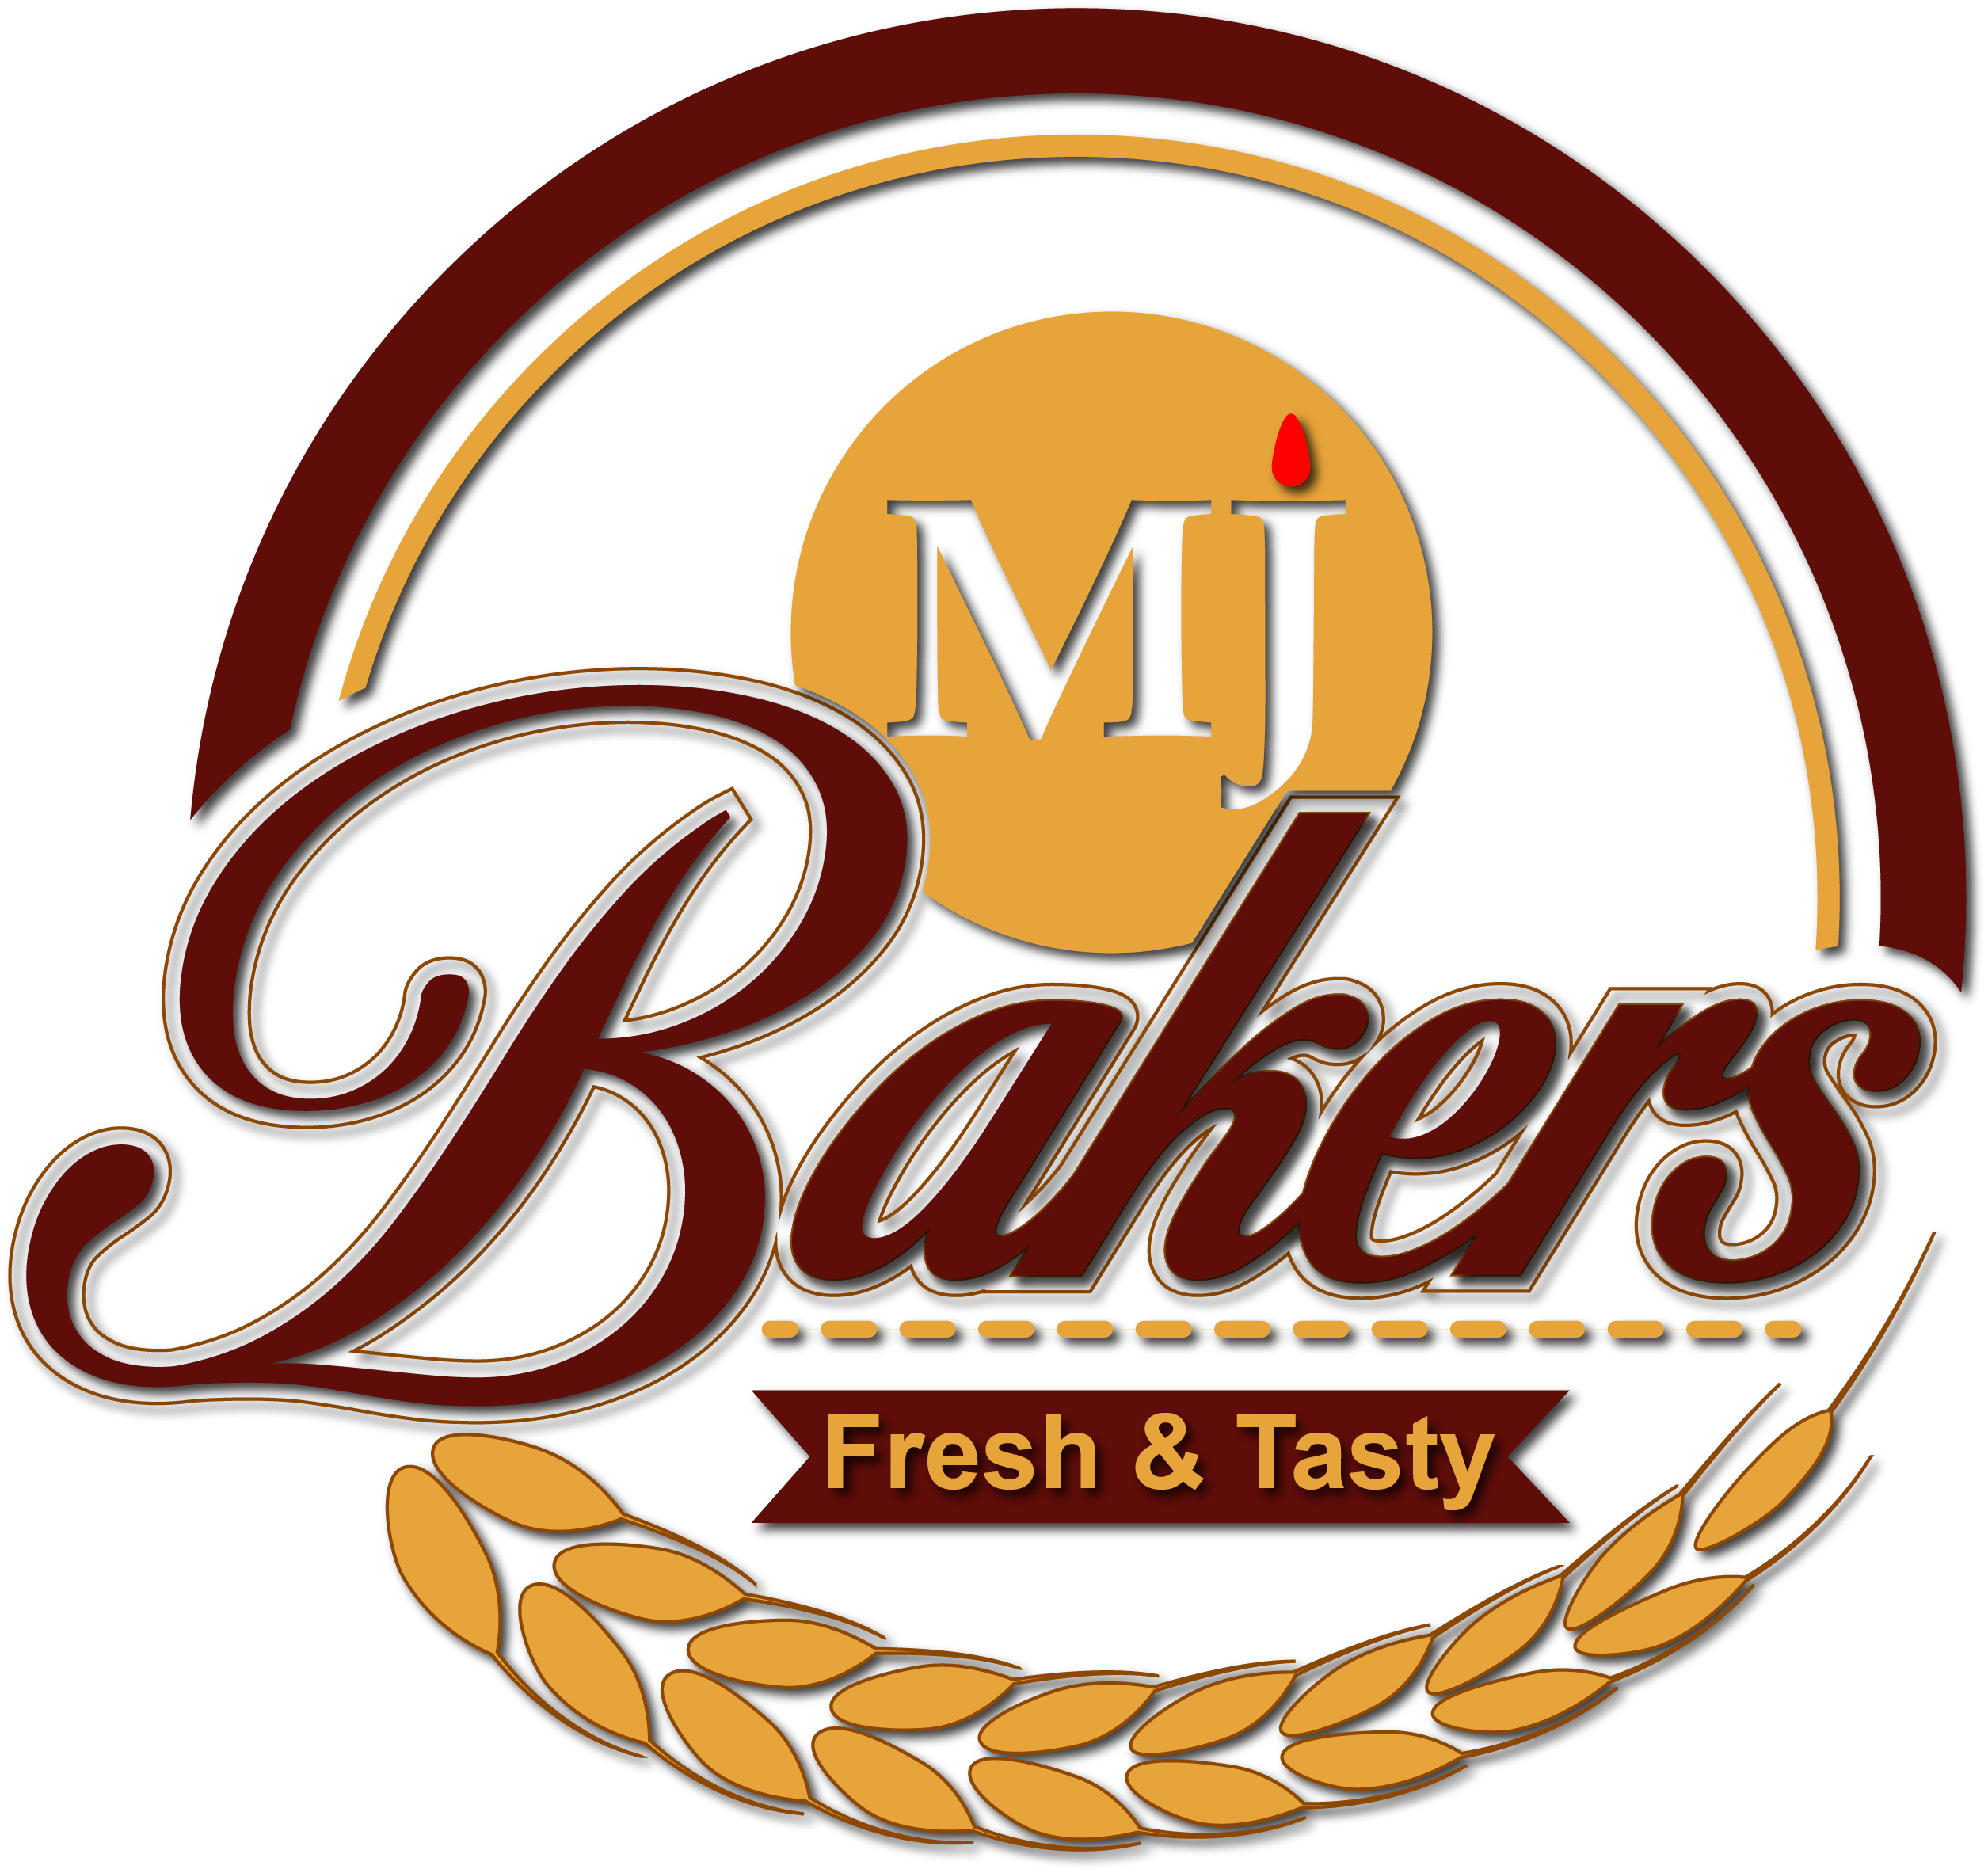 MJ bakers - Bakery Product Brand of IndiaFoods and DiningFood SnacksAll Indiaother